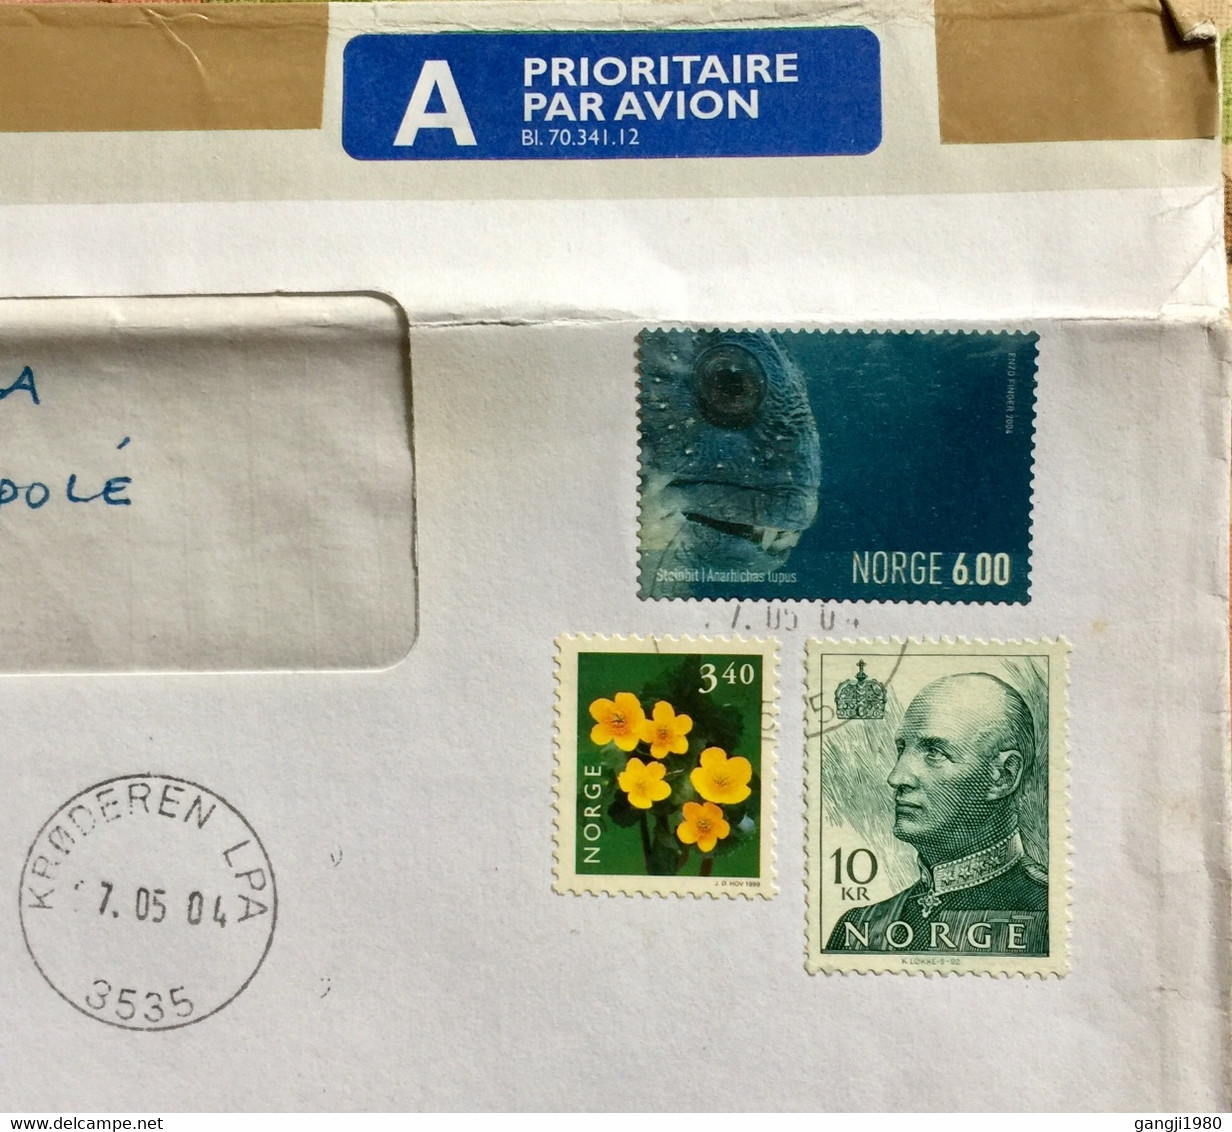 NORWAY 2004,AIRMAIL USED COVER TO LITHUANIA, KRODERN LPA,MARIJAMPOLE, CANCELLATION,19=40 KROWN RATE !!! FISH ,FLOWER, - Covers & Documents